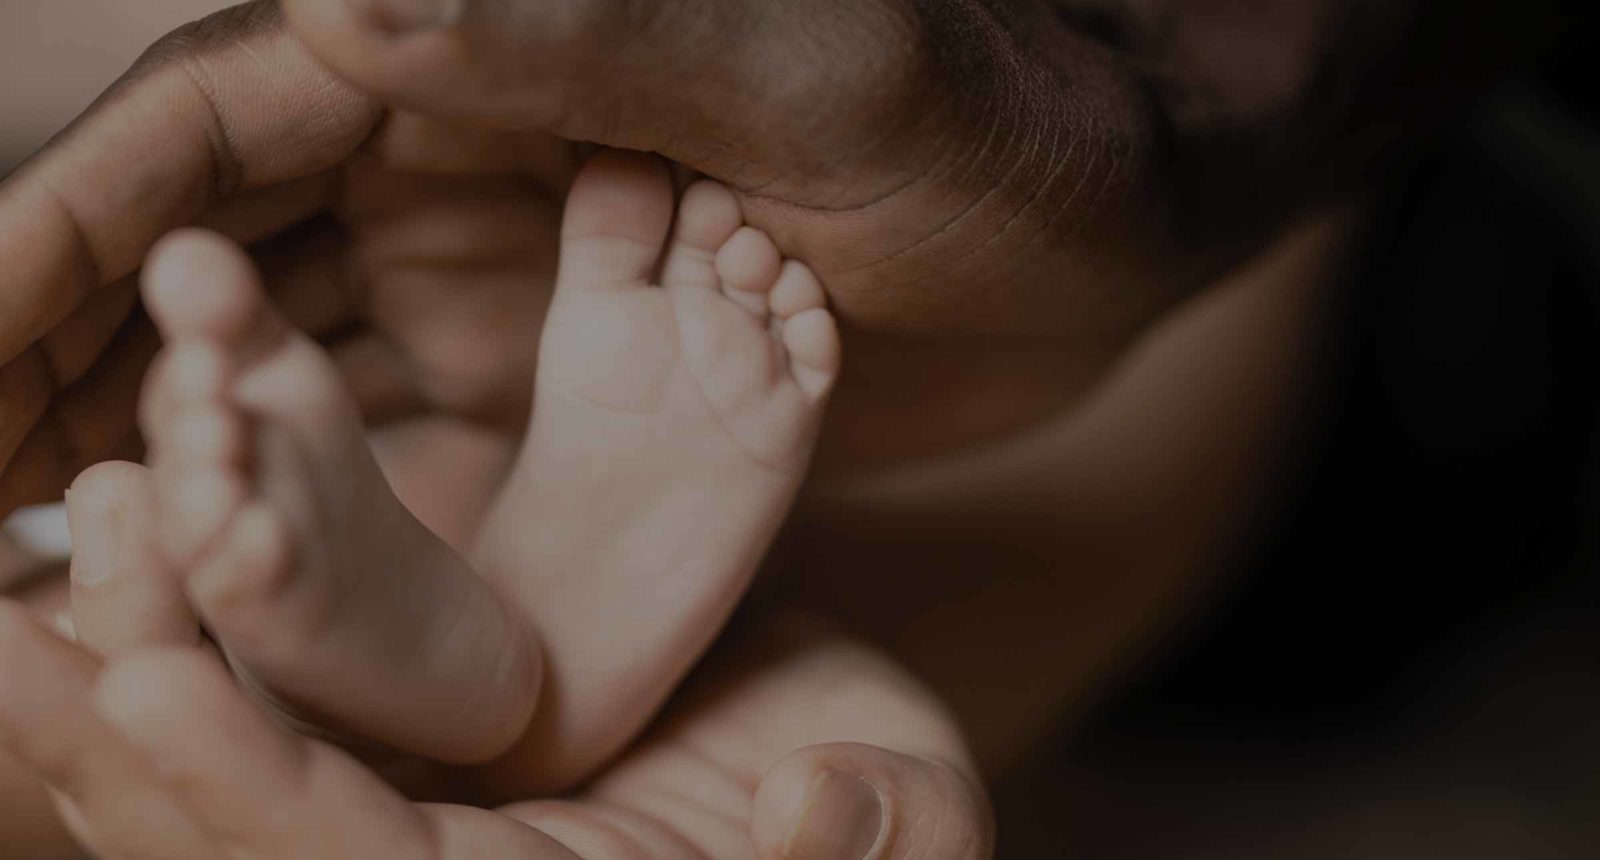 Family holds newborn baby's feet after experiencing birth injury